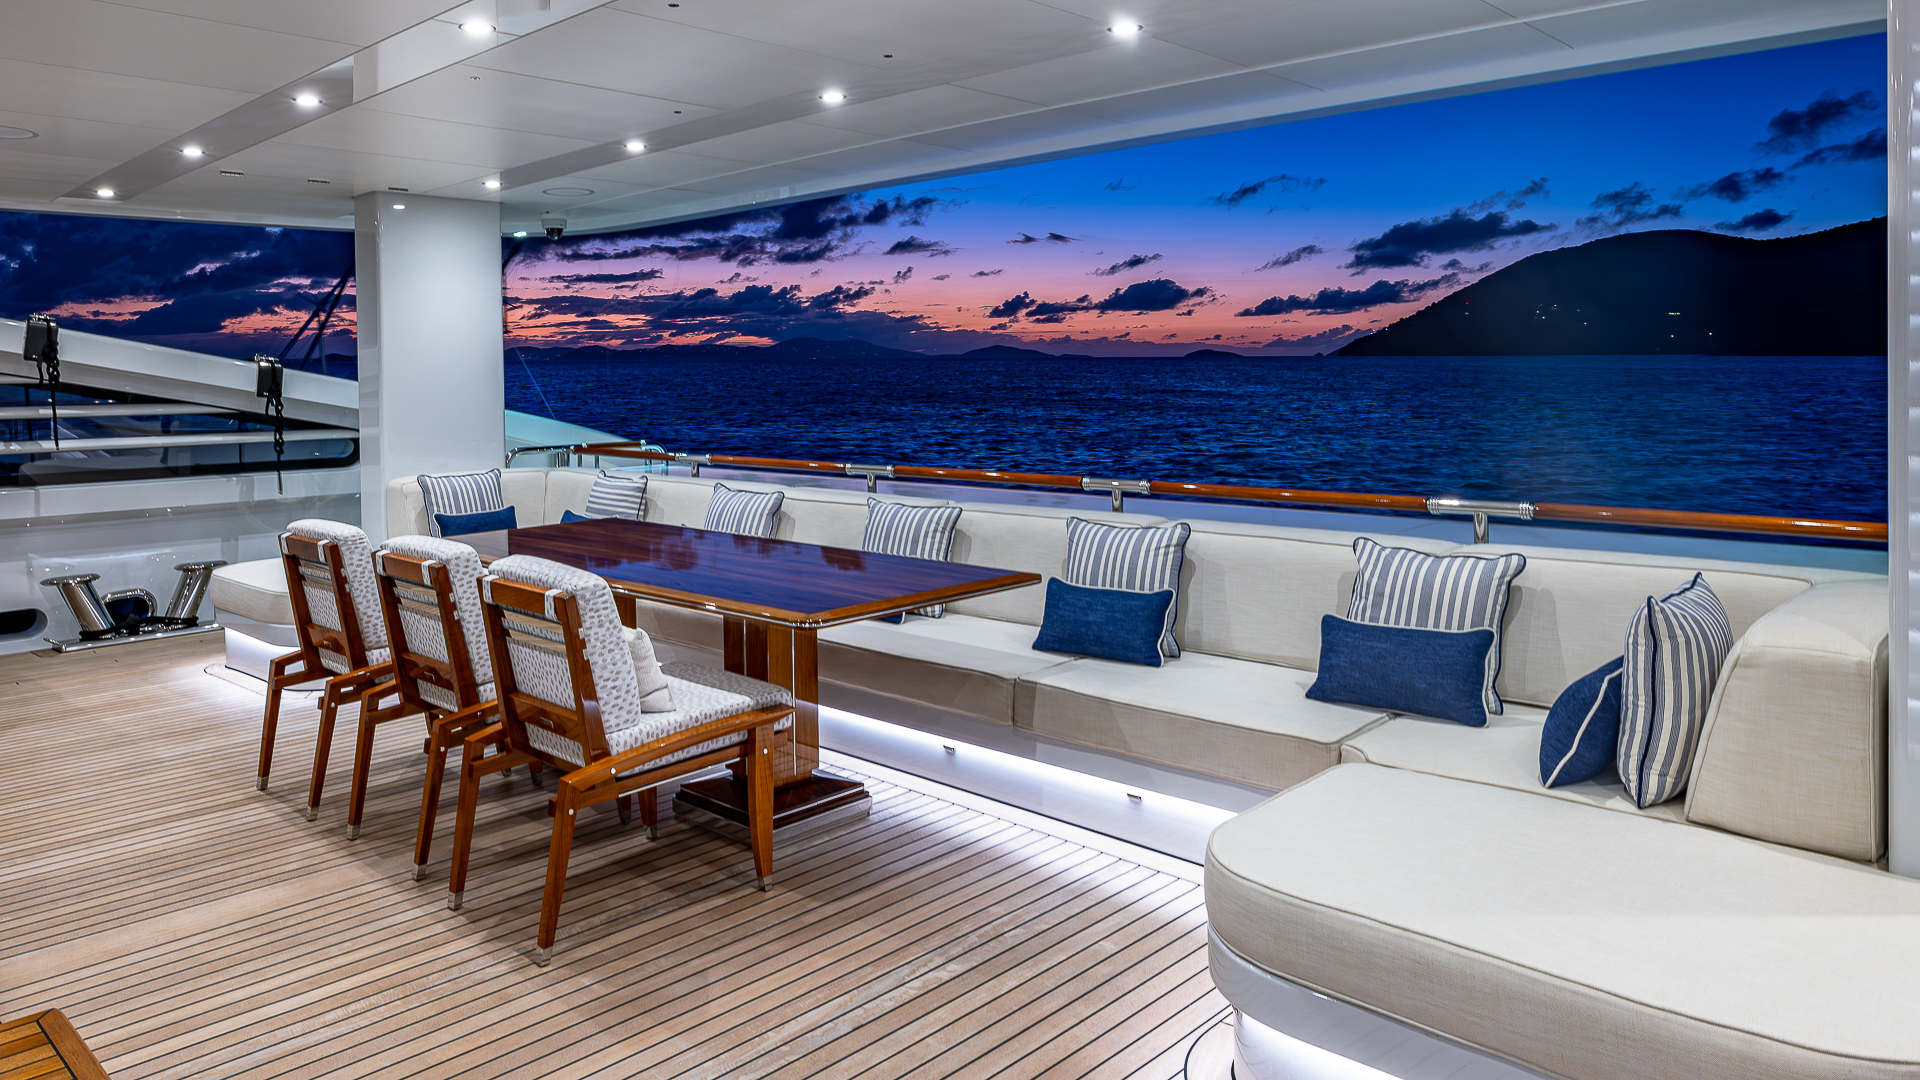 Rock It Main Deck Aft - Evening Credit Yachting Image